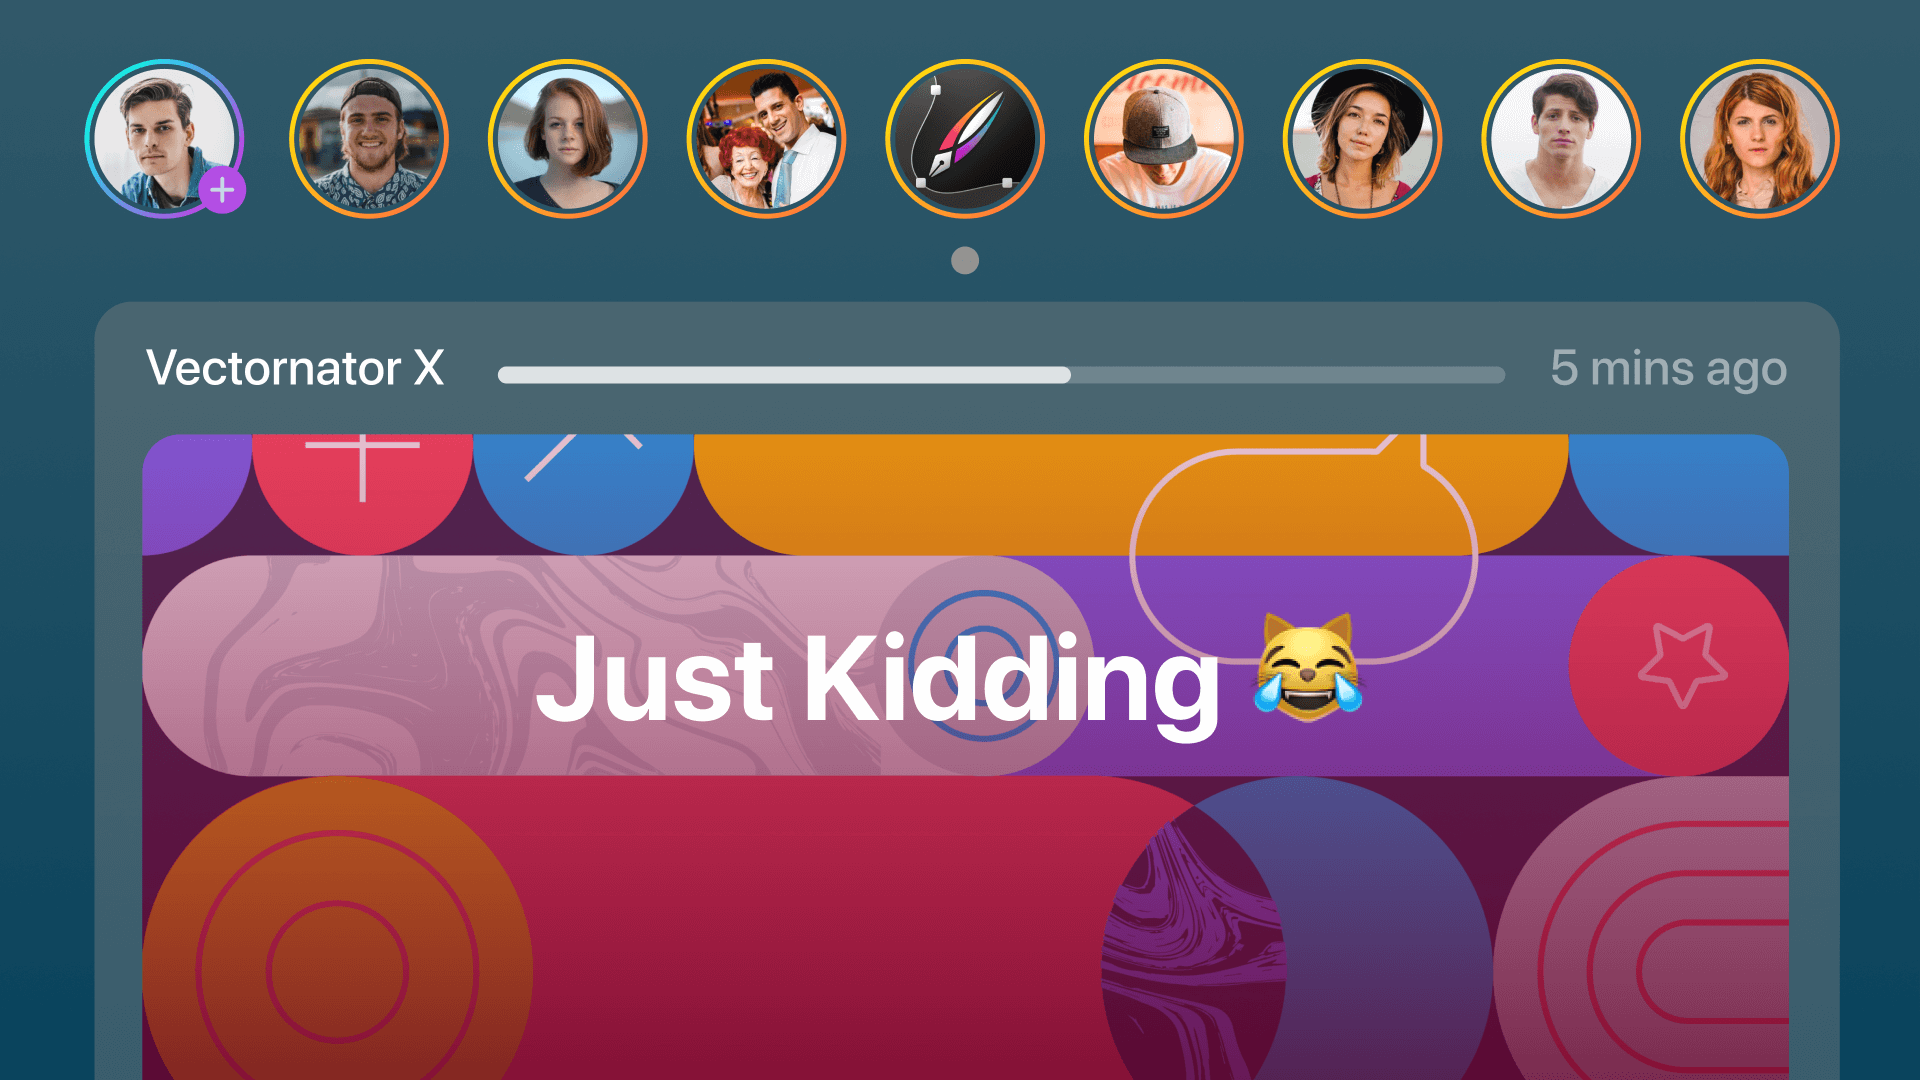 User interface of a social app with profile pictures and a 'Just Kidding' status update